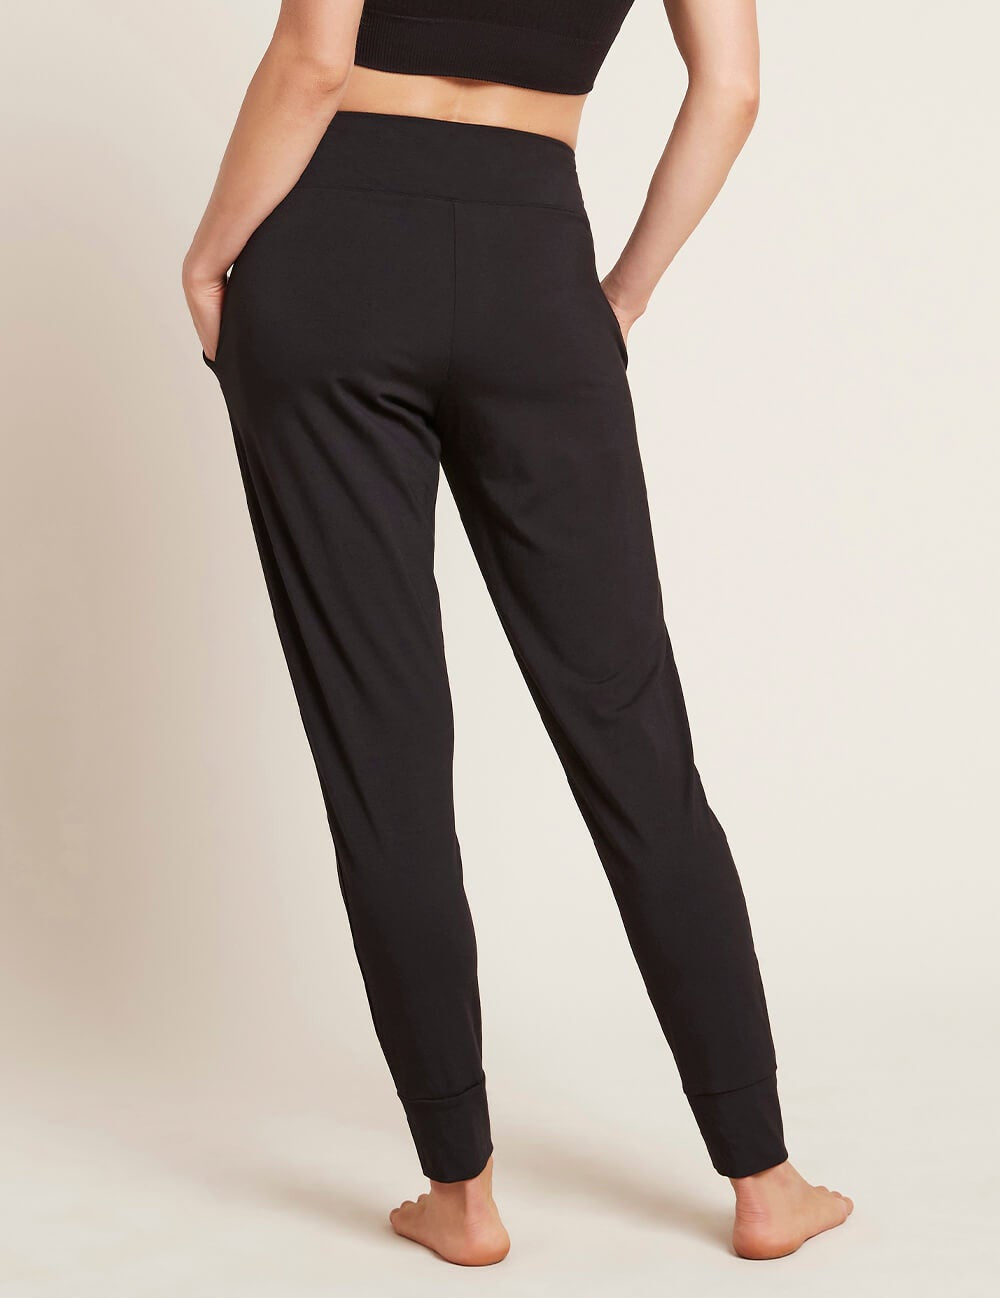 Boody Downtime Lounge Pants -Black – All things organic